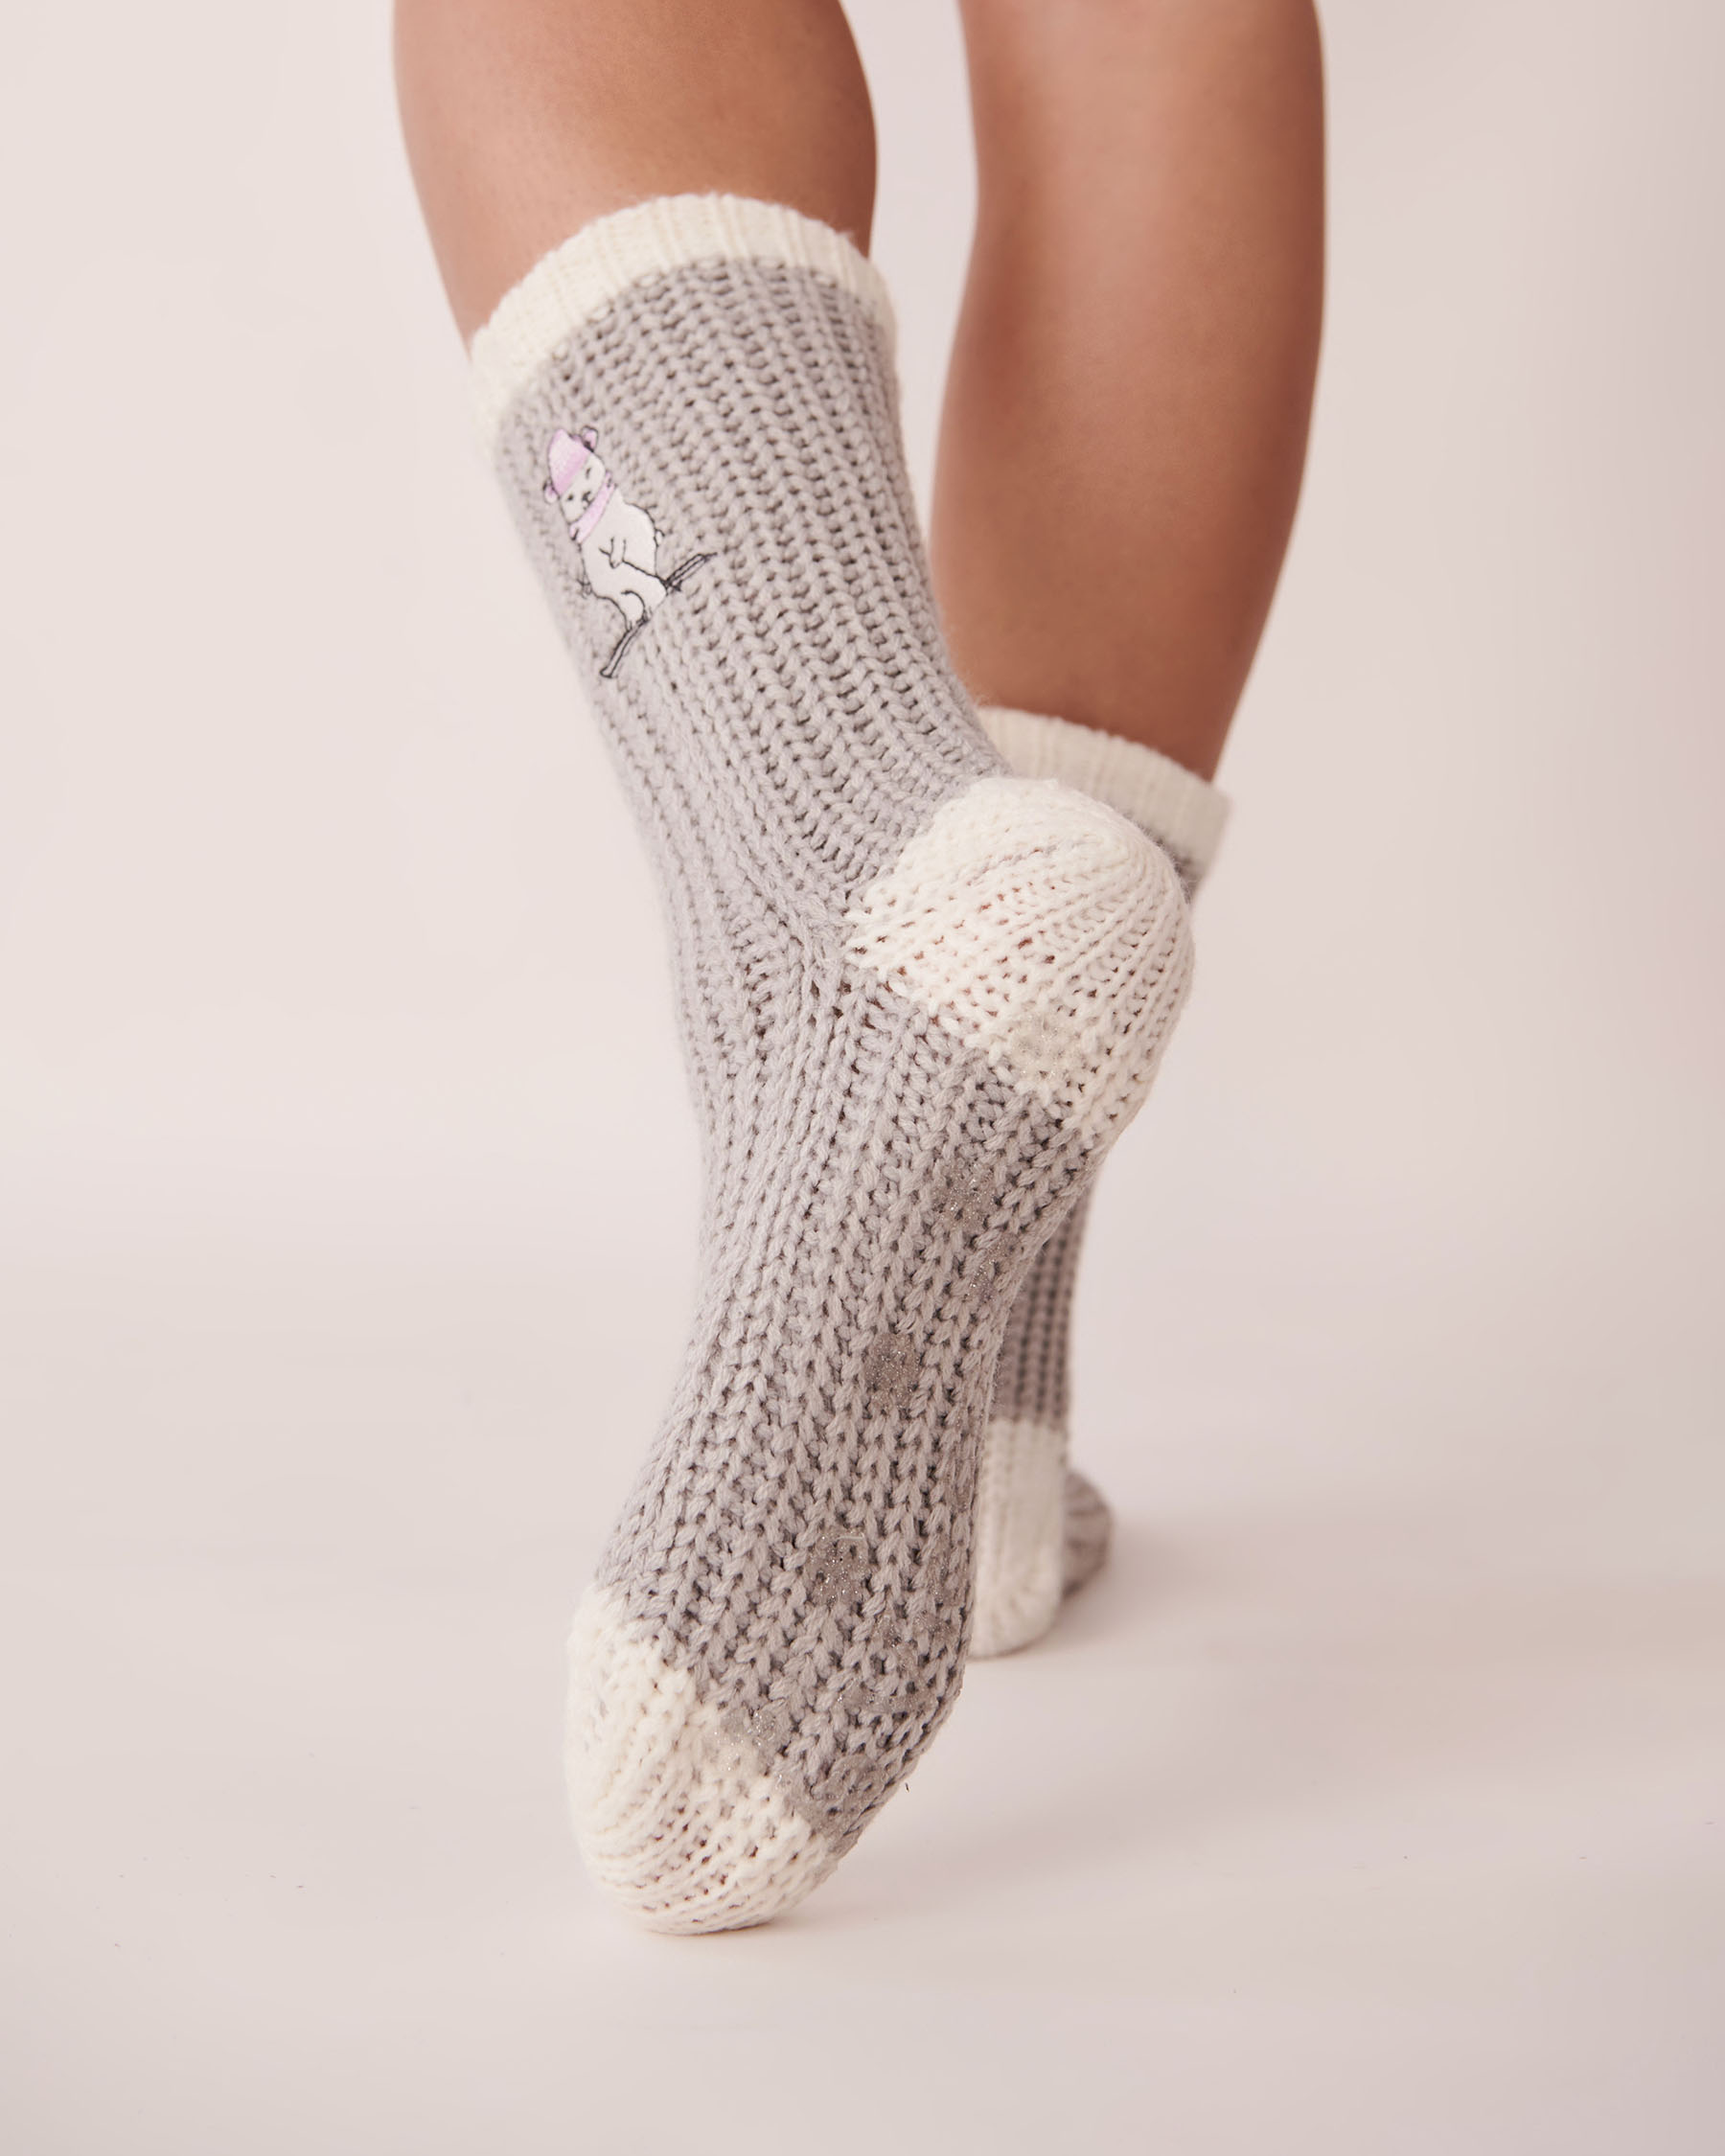 LA VIE EN ROSE Knitted Socks with winter Embroidery Silver grey 40700245 - View2